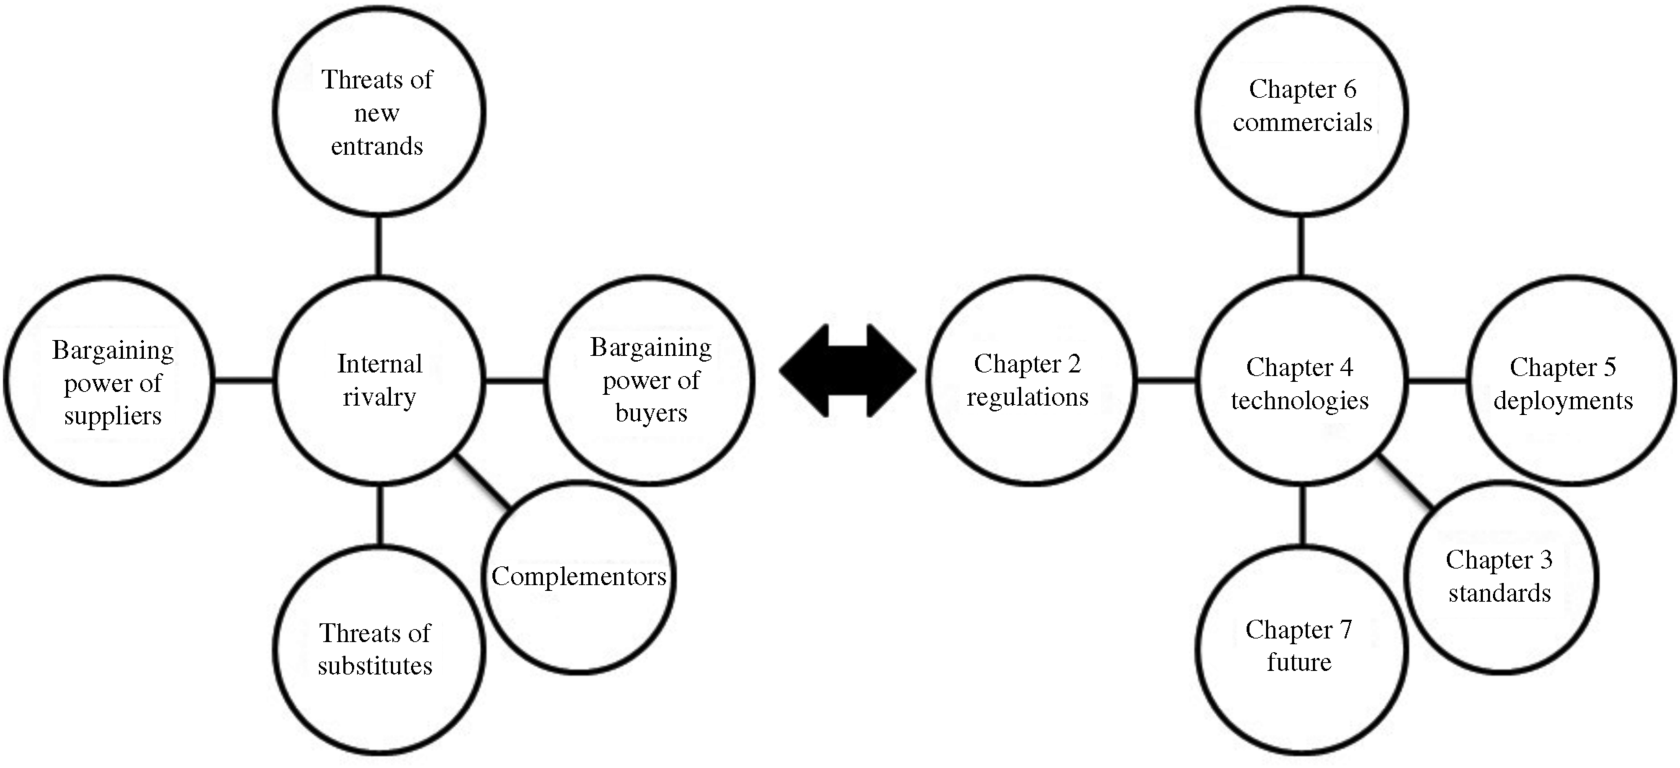 On the left-hand side is a circle denoting internal rivalry connected to five circles denoting threats of new entrants, bargaining power of buyers, complementors, threats of substitutes, and bargaining power of suppliers (clockwise starting from top). On the right-hand side is a circle denoting Chapter 4 “technologies” connected to five circles denoting Chapter 6 “commercial,” Chapter 5 “deployment,” Chapter 3 “standards,” Chapter 7 “future,” and Chapter 2 “regulations” (clockwise starting from top). Both the structures are connected by a bidirectional arrow.